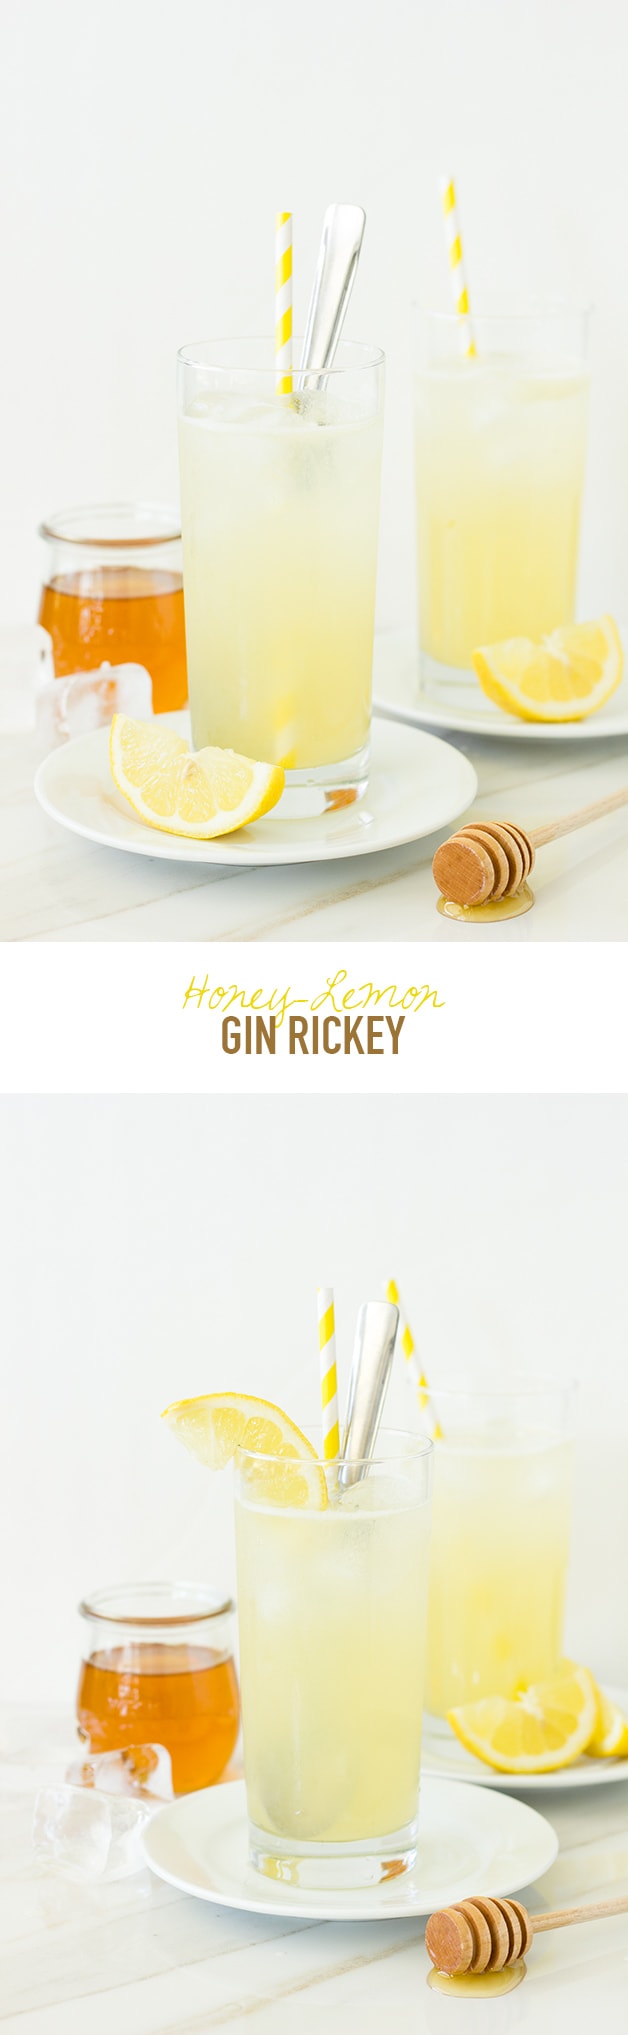 Honey-Lemon Gin Rickey | A quintessential drink for warm summer afternoons - tart and refreshing with background notes of honey that lend the perfect bit of floral sweetness.  | www.brighteyedbaker.com